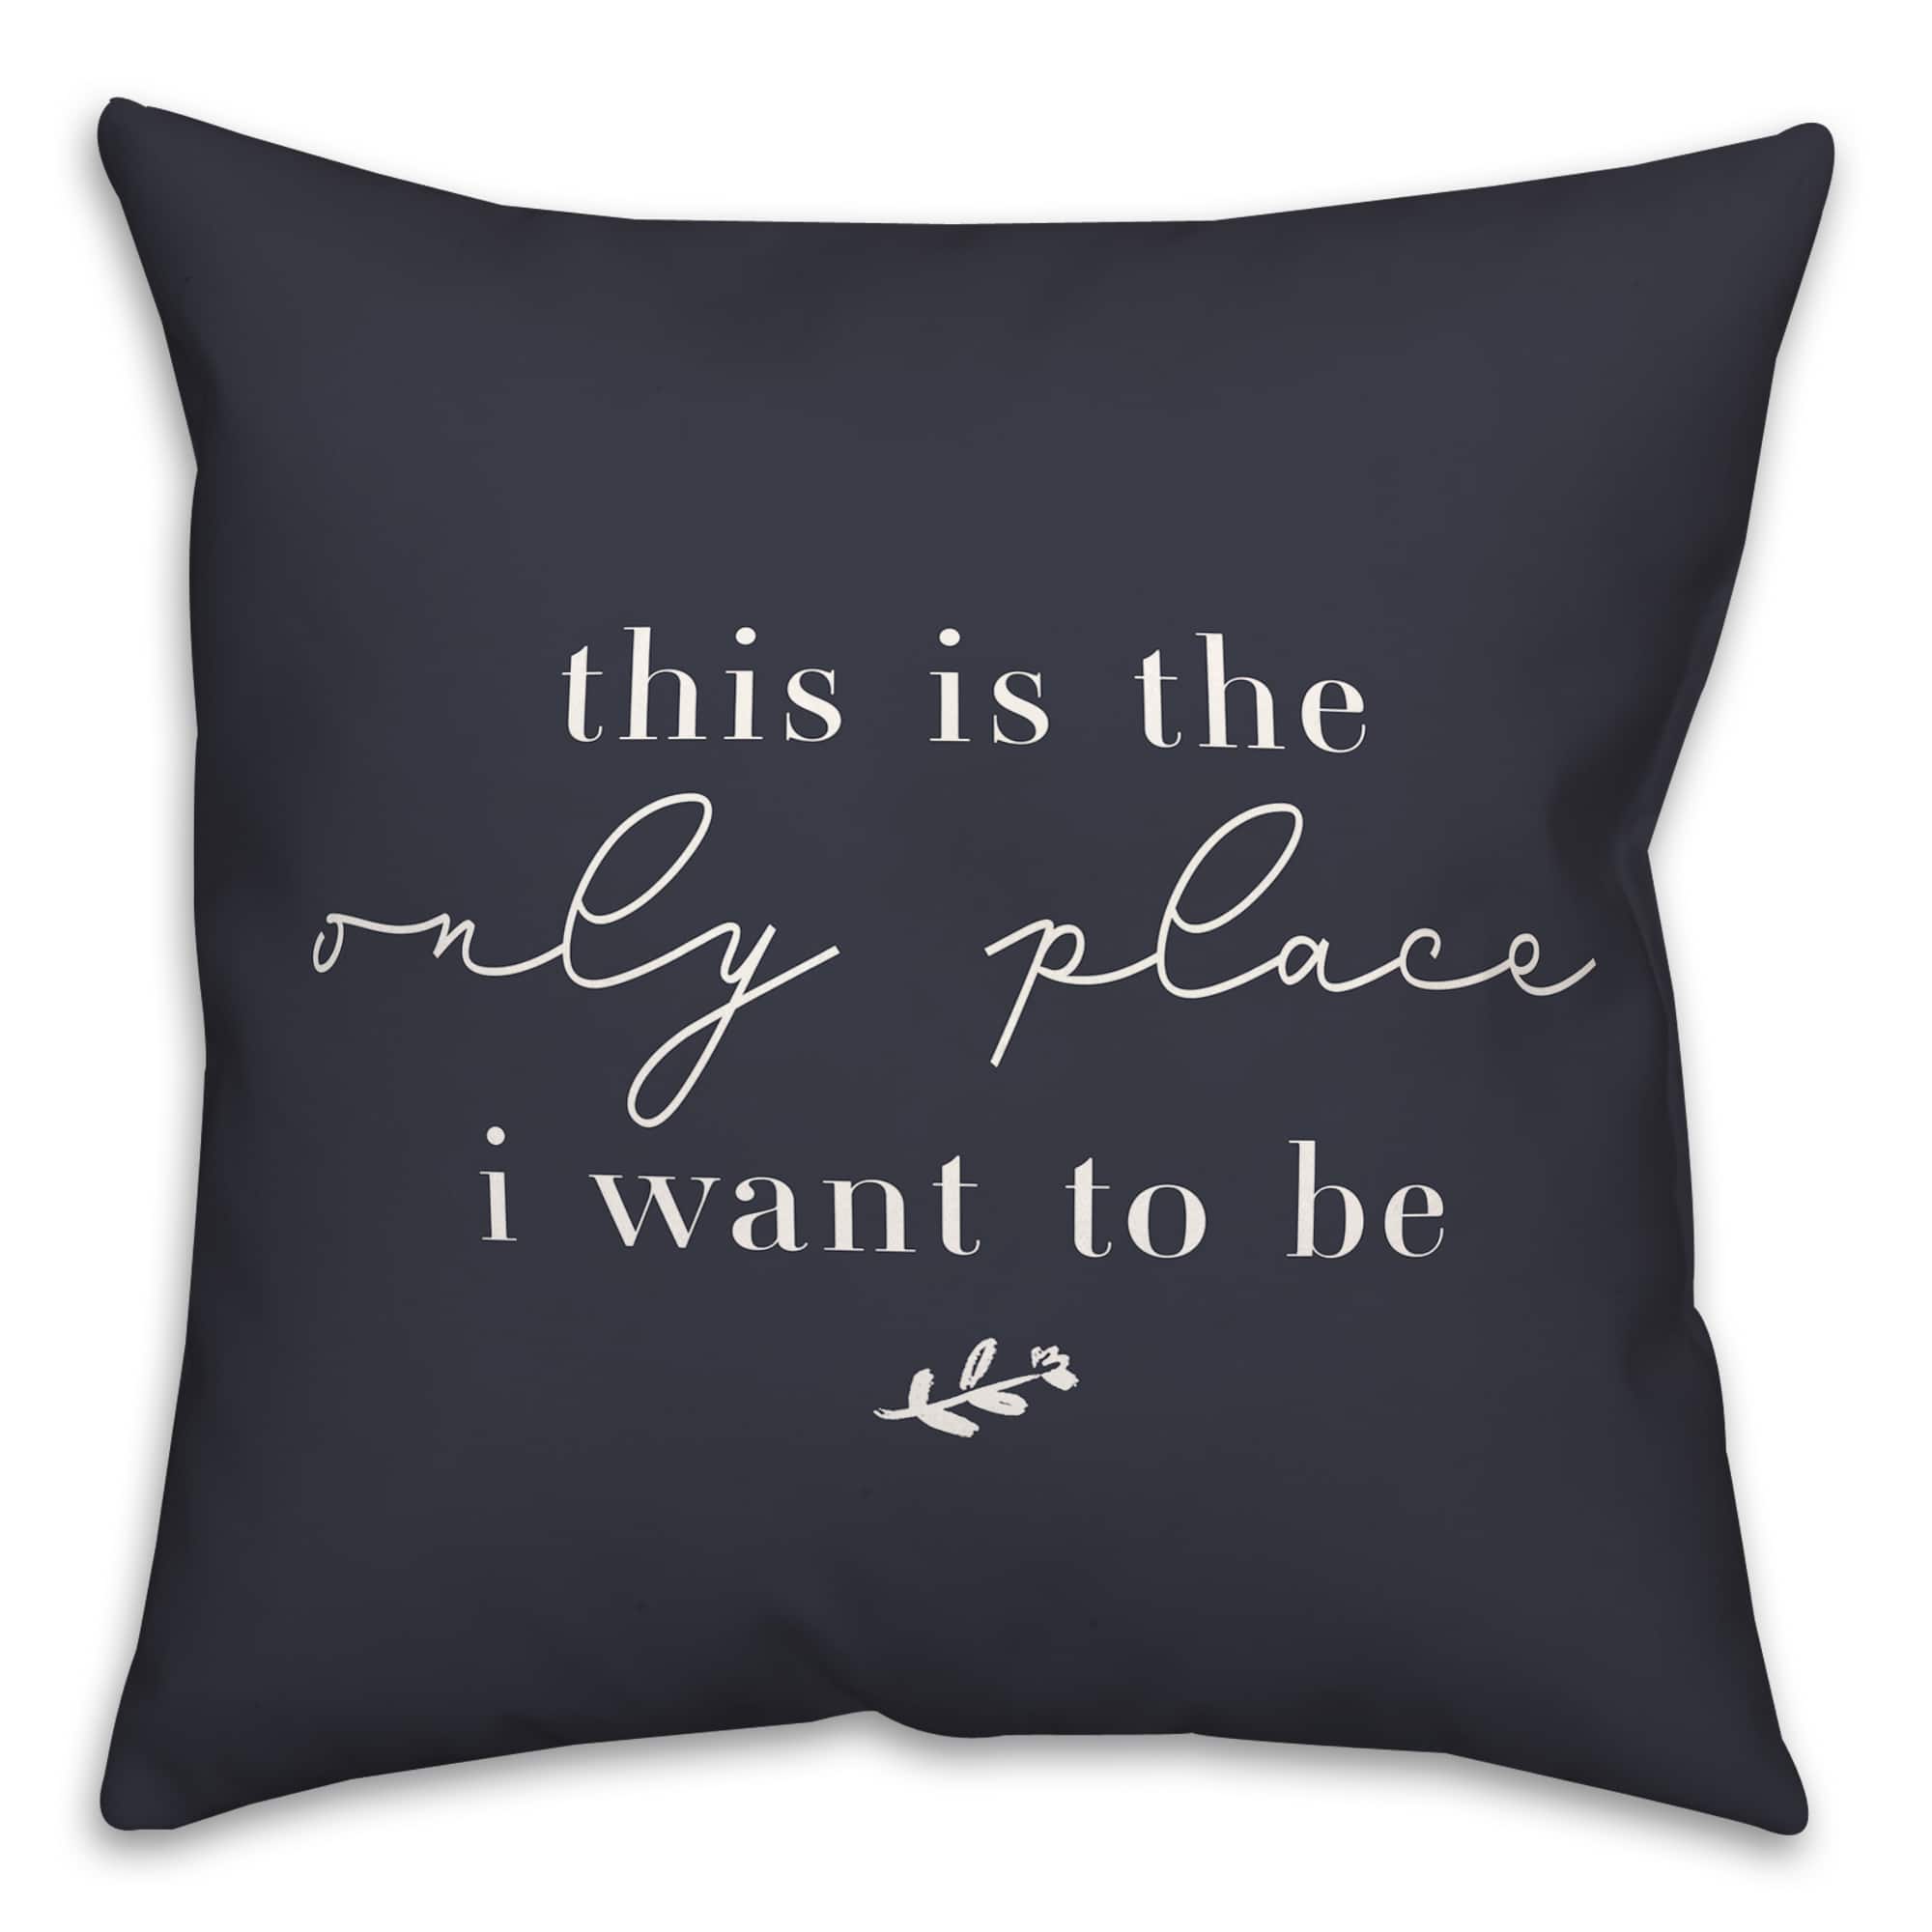 18" x 18" Only Place Versatile Throw Pillow